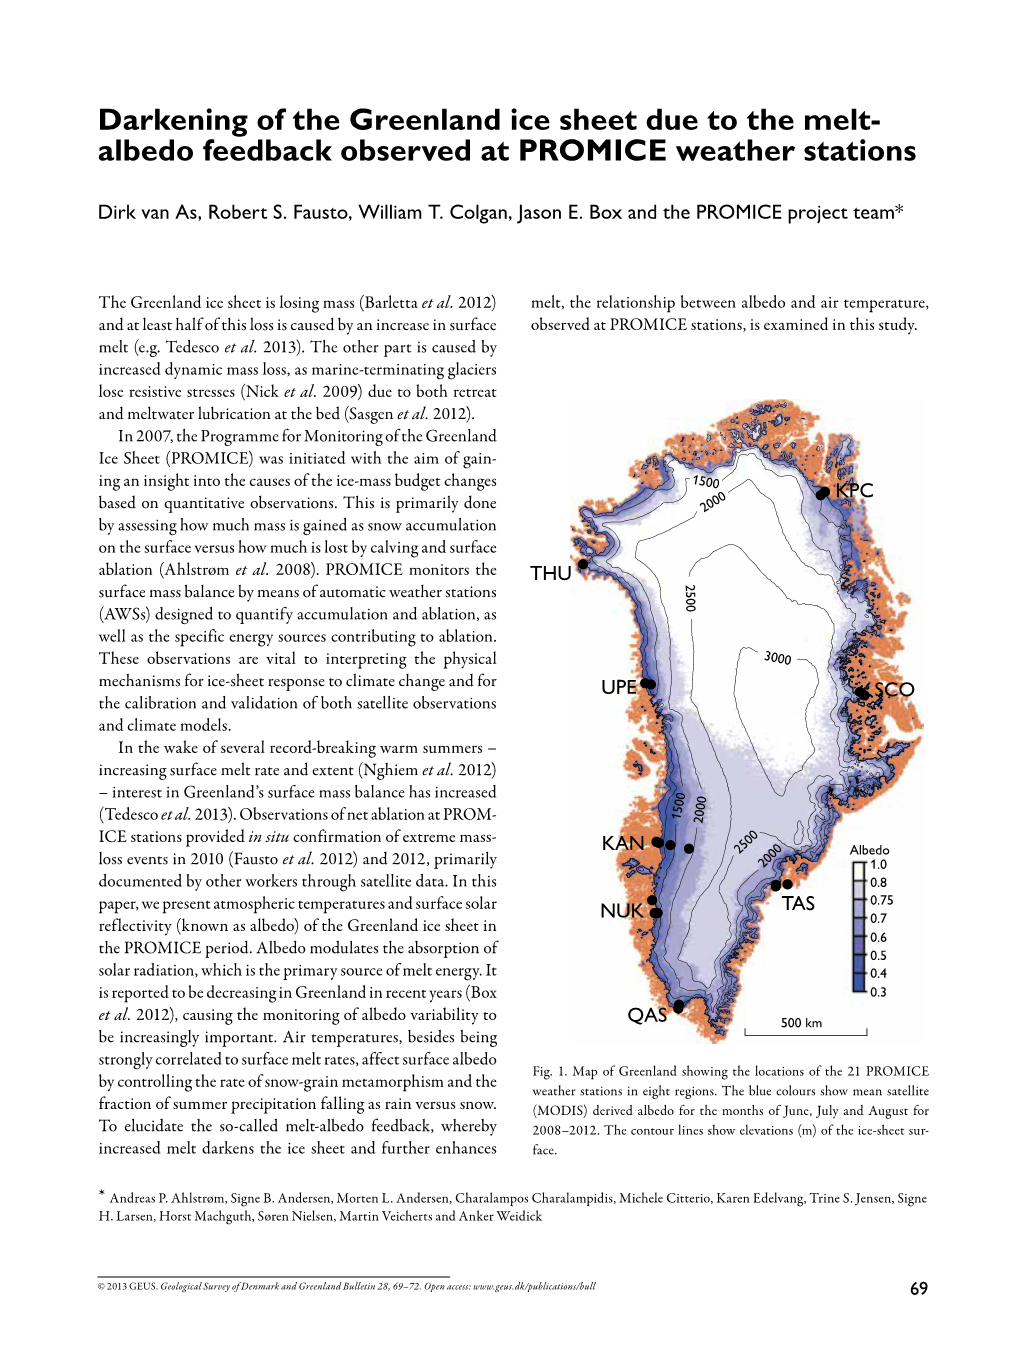 Geological Survey of Denmark and Greenland Bulletin 28, 2013, 69-72